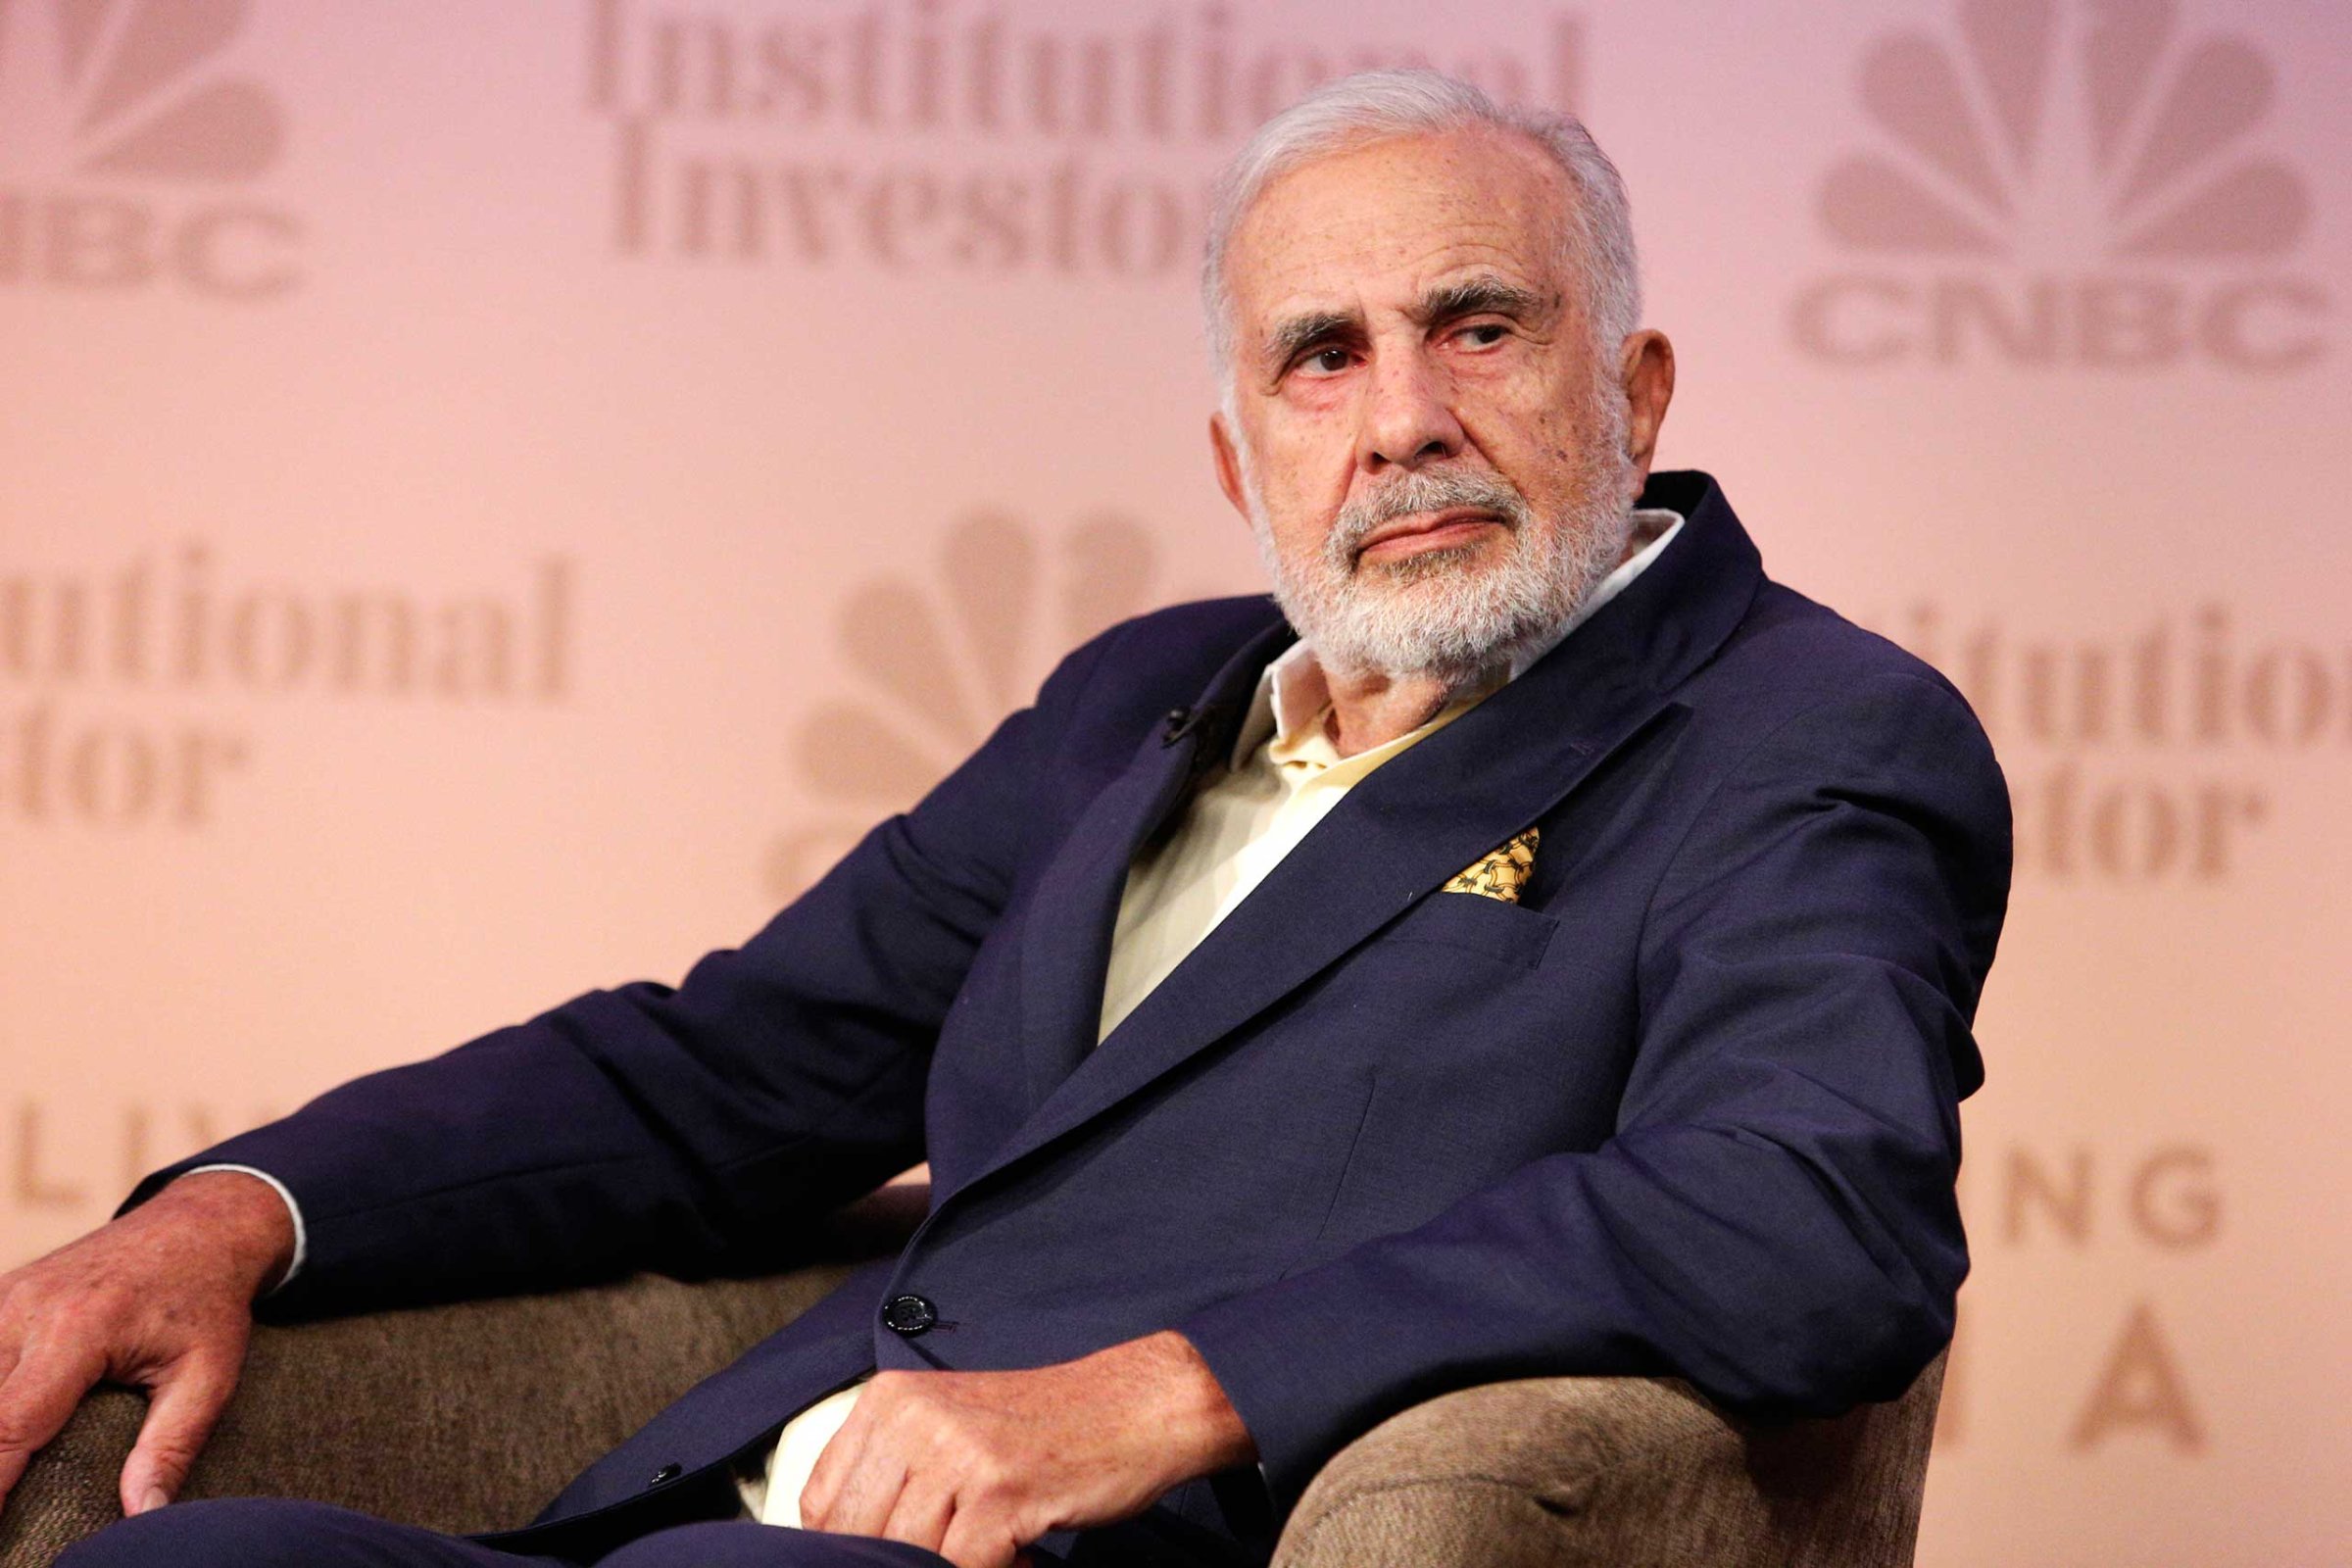 Carl Icahn, Chairman, Icahn Enterprises at the CNBC Institutional Investor Delivering Alpha Conference in New York in June 2014.